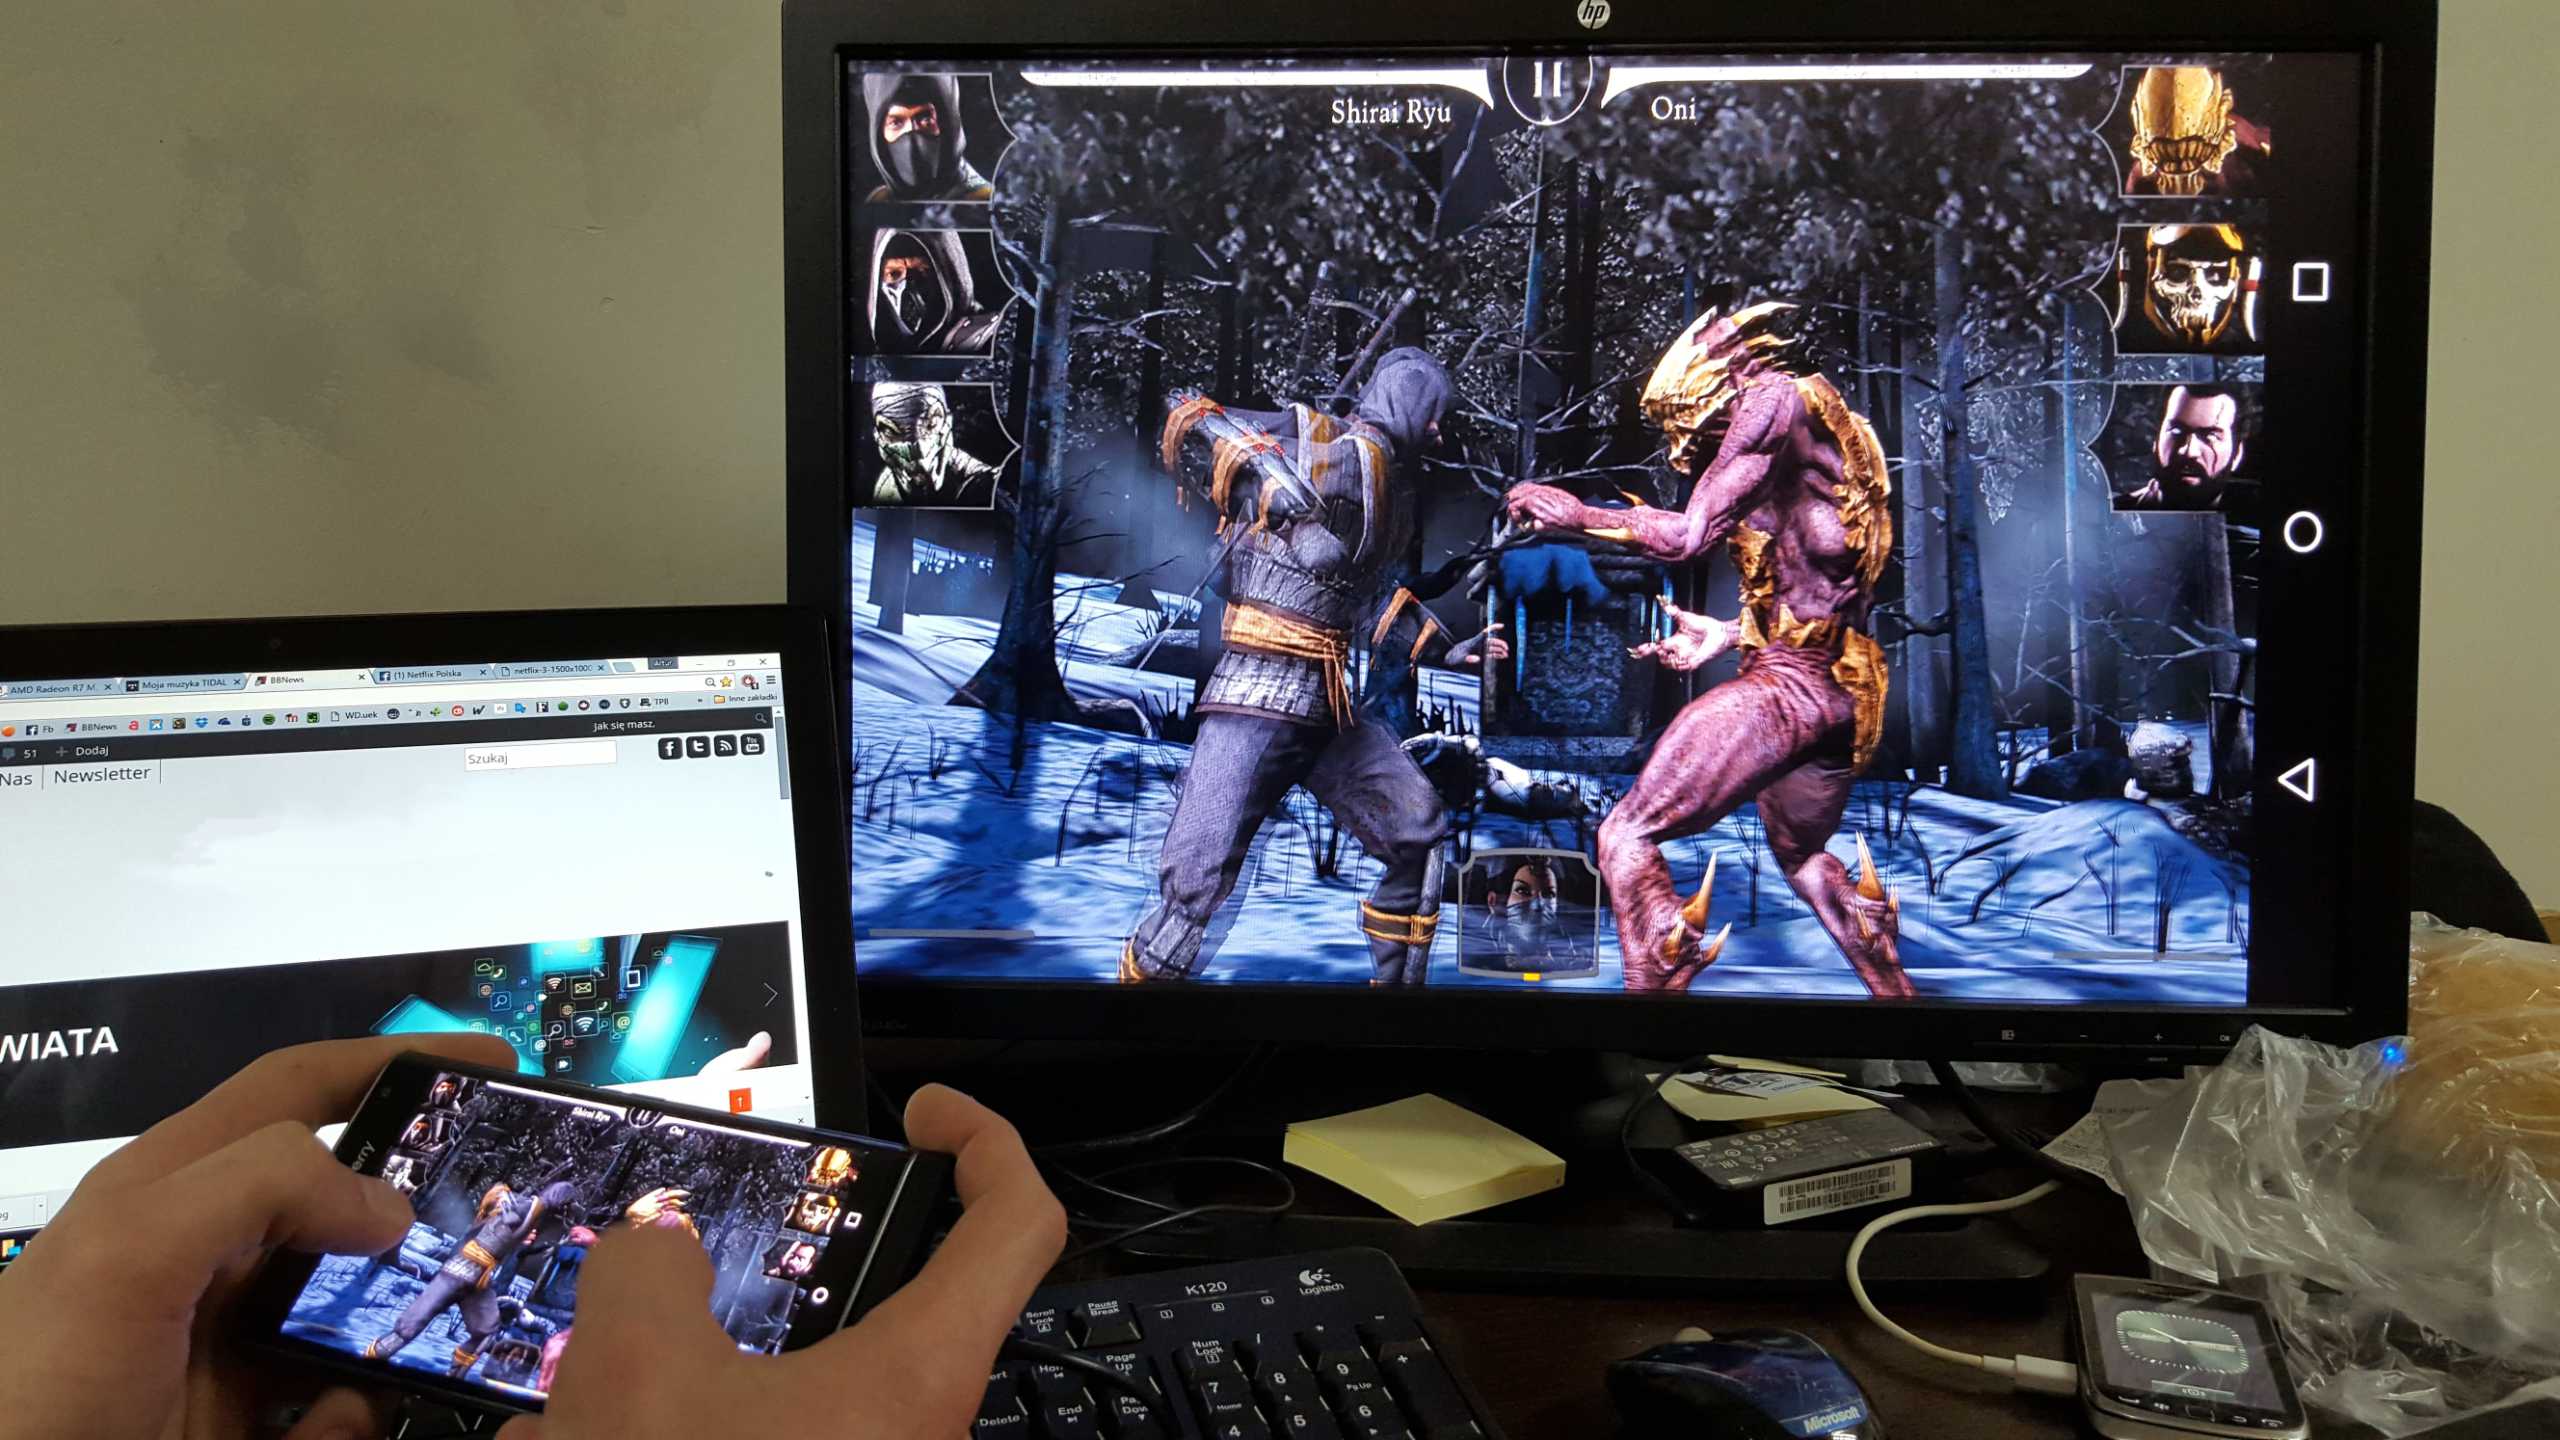 Mobile vs PC gaming: What are the differences and which is more popular?